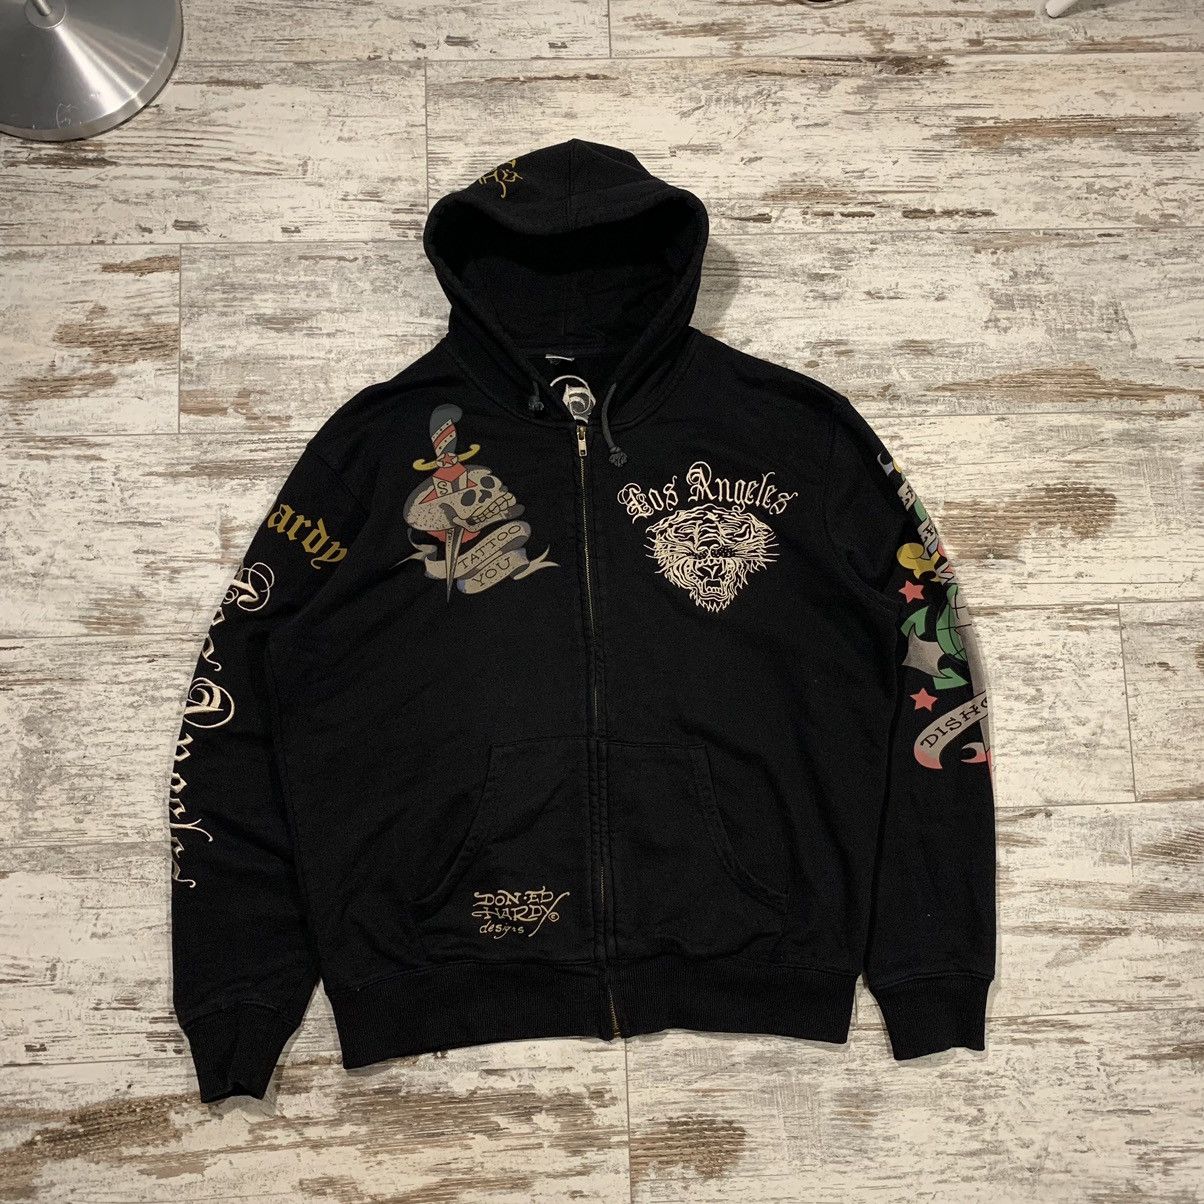 Vintage VINTAGE ED HARDY BY CHRISTIAN AUDIGIER LOS ANGELES HOODIE Size US L / EU 52-54 / 3 - 2 Preview